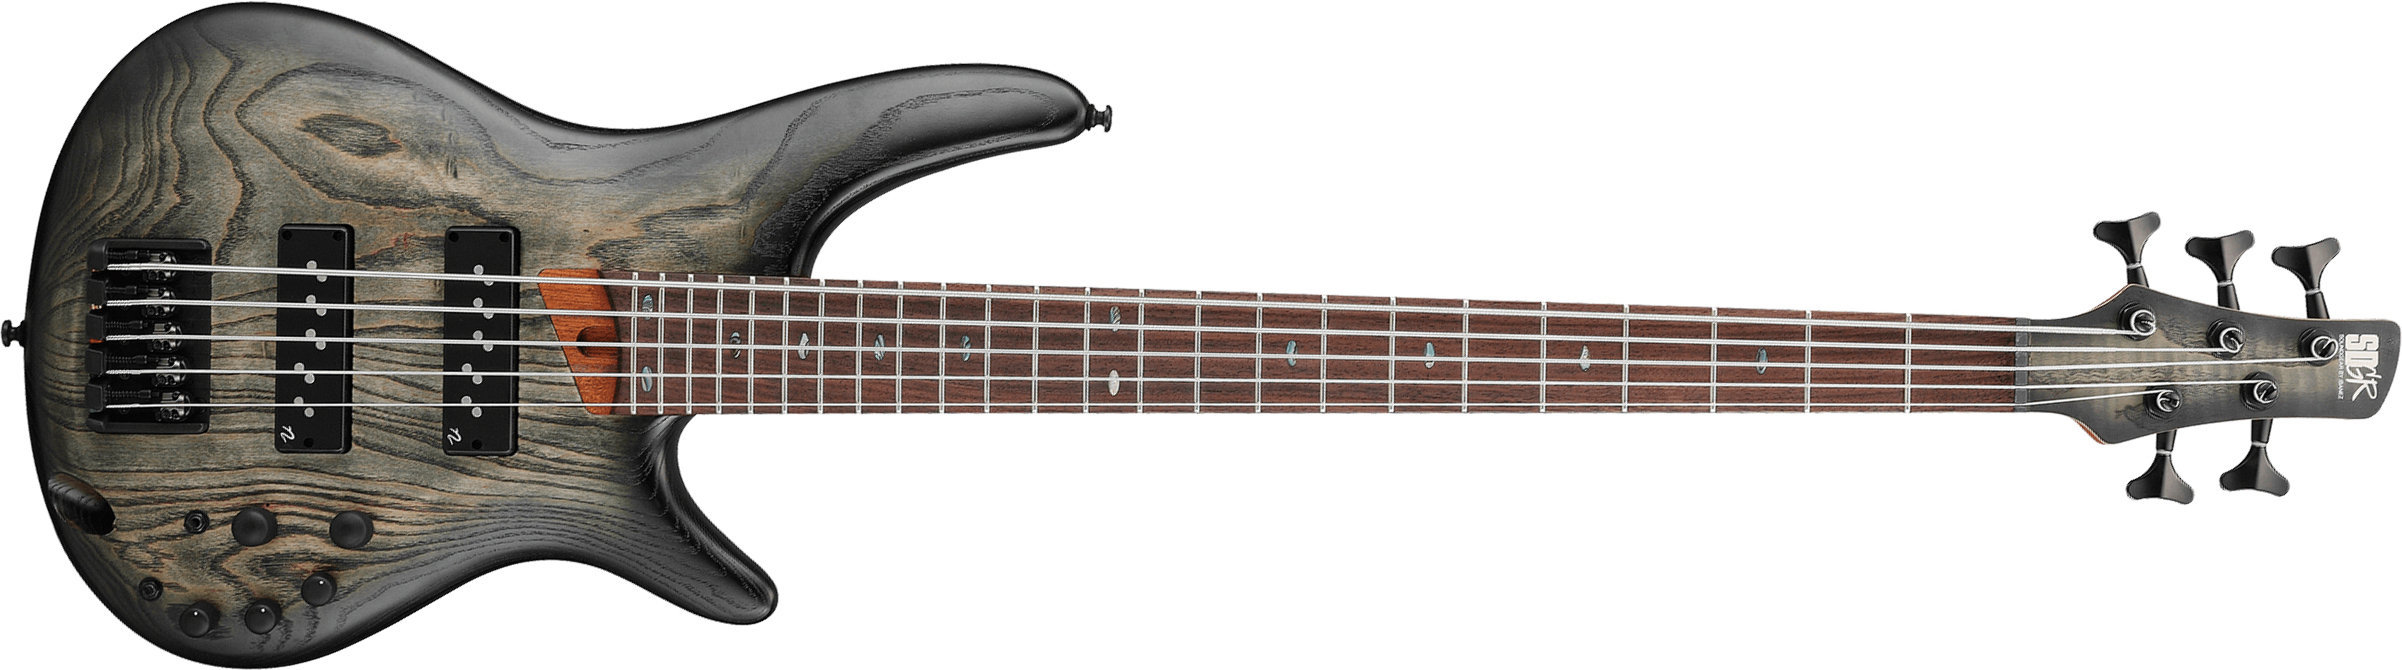 Ibanez Sr605e Ctf Standard 5c Active Rw - Black Stained Burst - Solidbody E-bass - Main picture